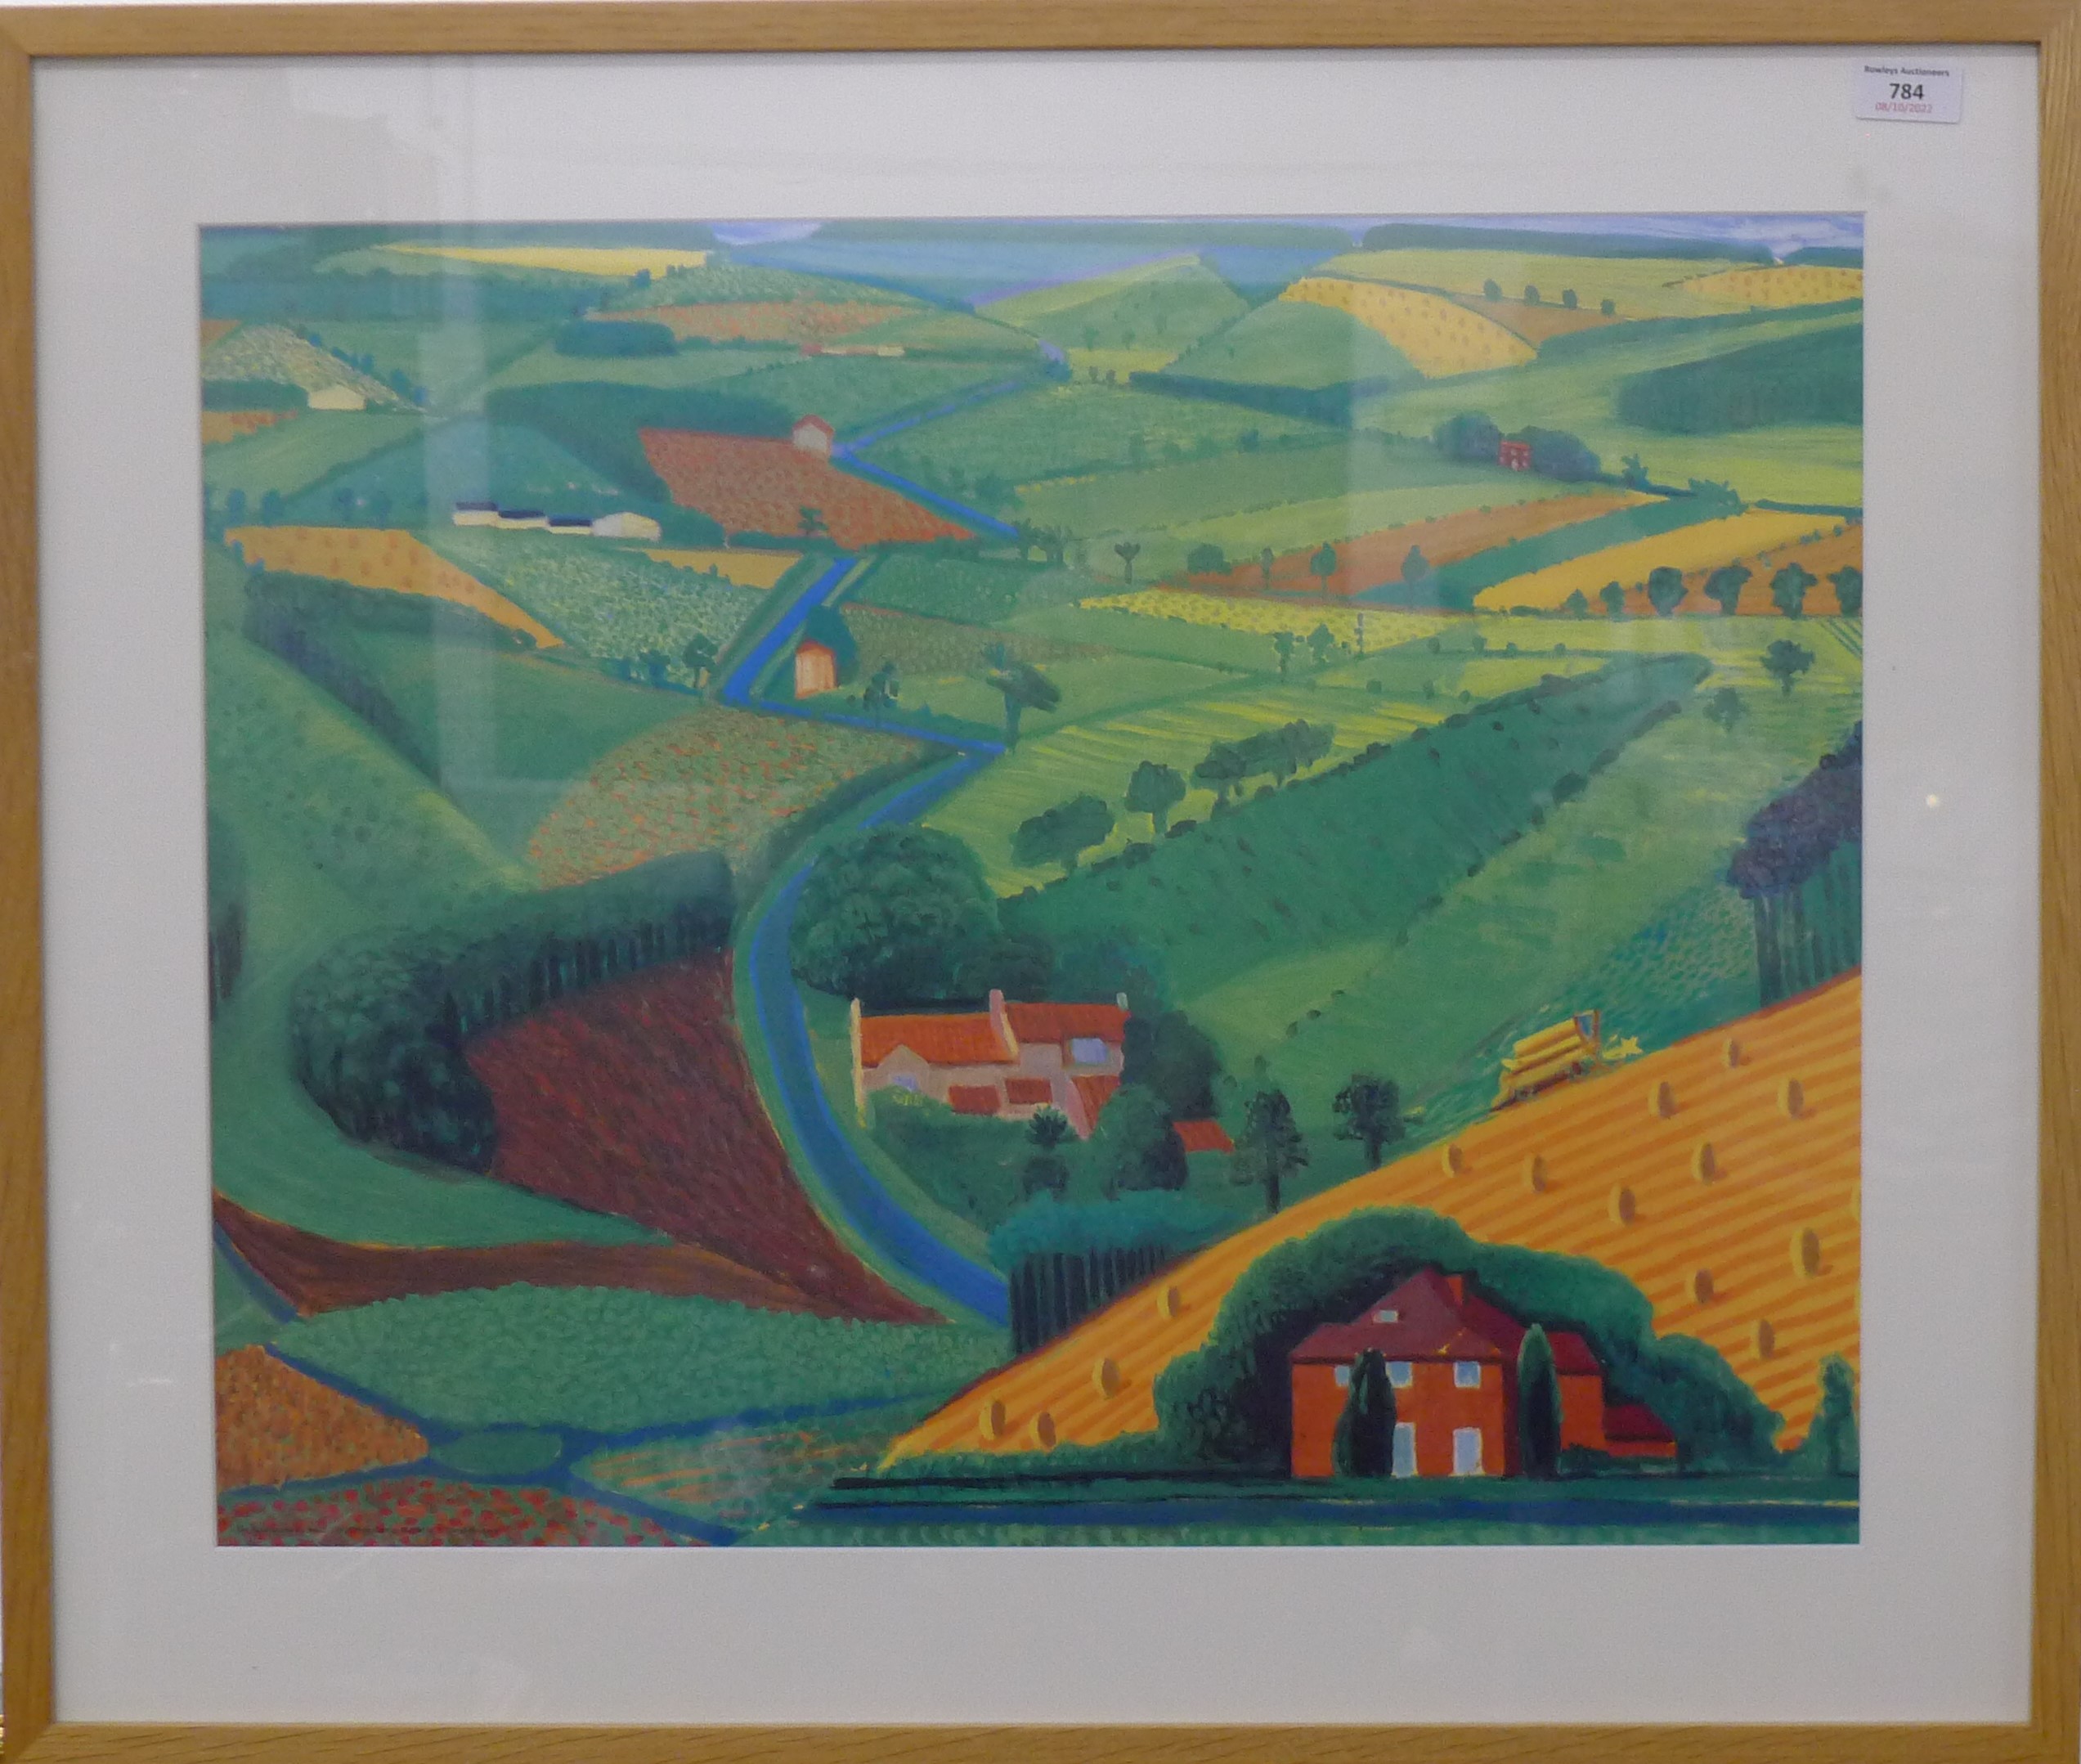 DAVID HOCKNEY, The Roads Across the Wolds, print, framed and glazed. 60 x 48 cm. - Image 2 of 2